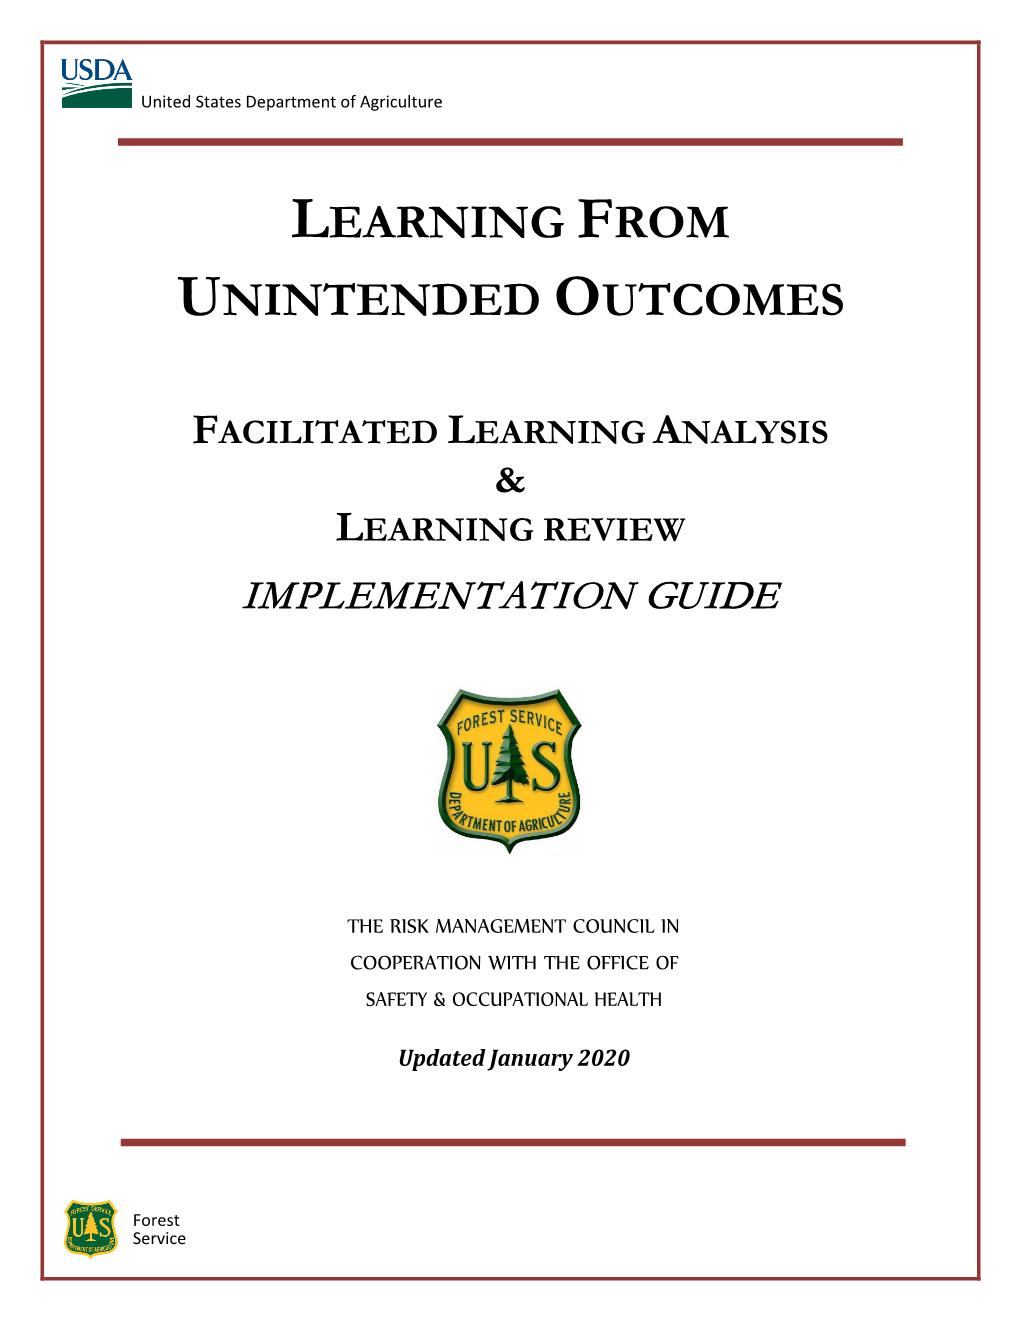 Learning from Unintended Outcomes